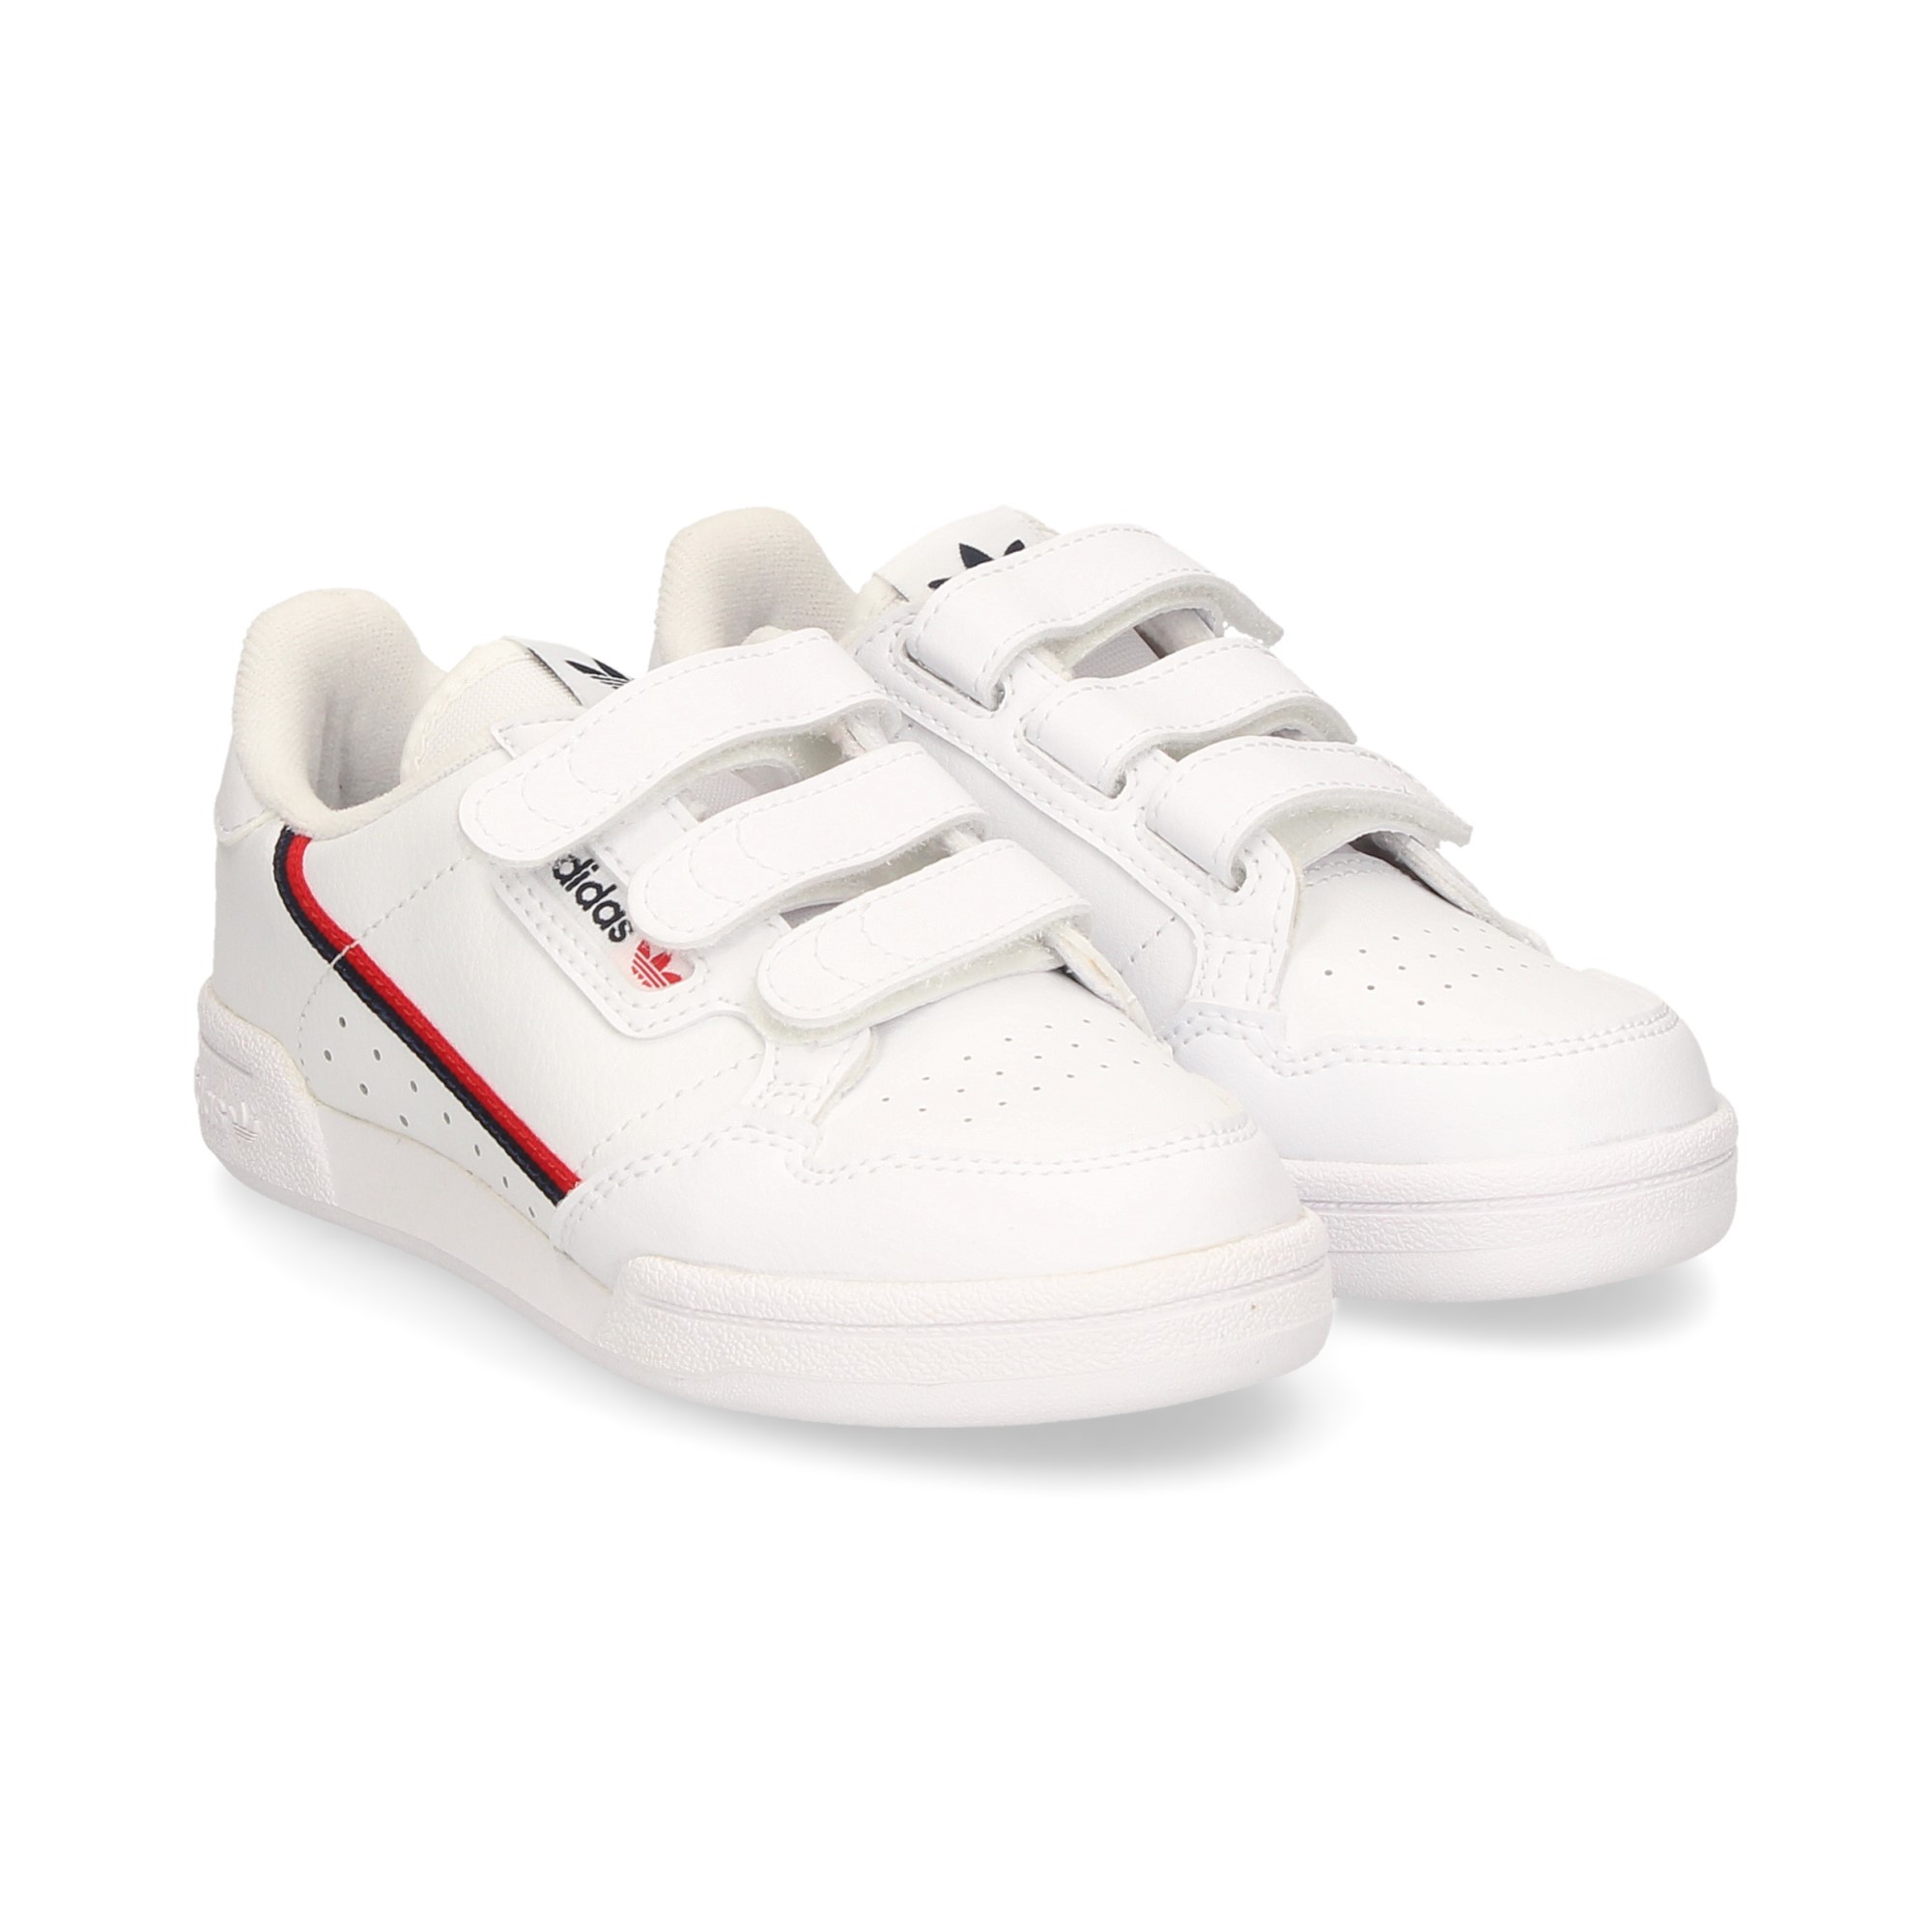 sporty-live-red-velcro-weiss-leder